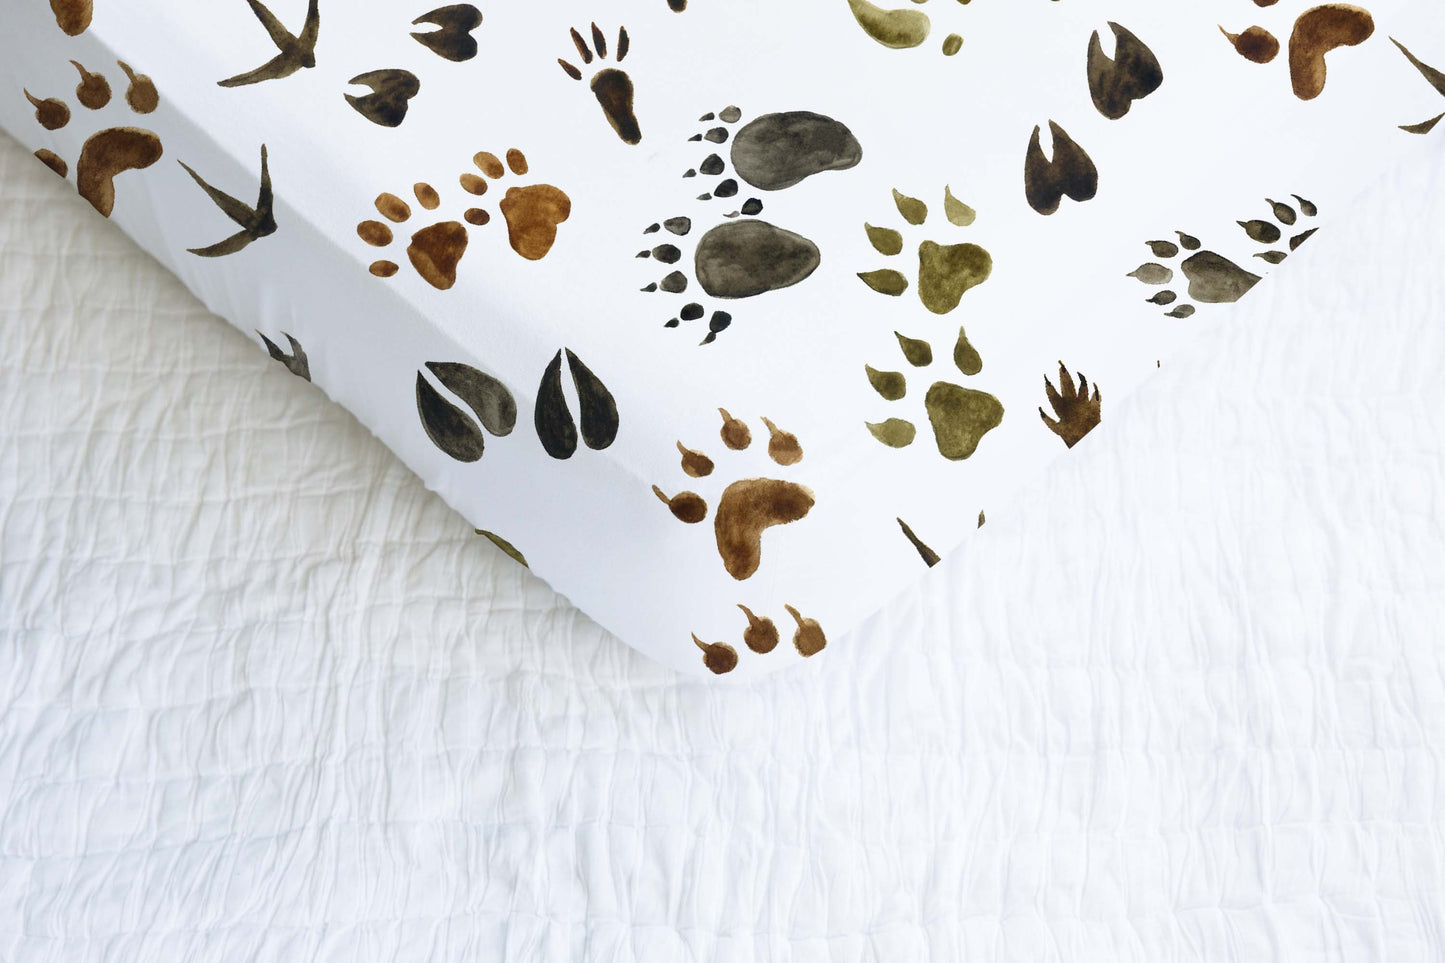 Animal Tracks Crib Sheet, Forest Nursery Bedding - Footprints in the forest